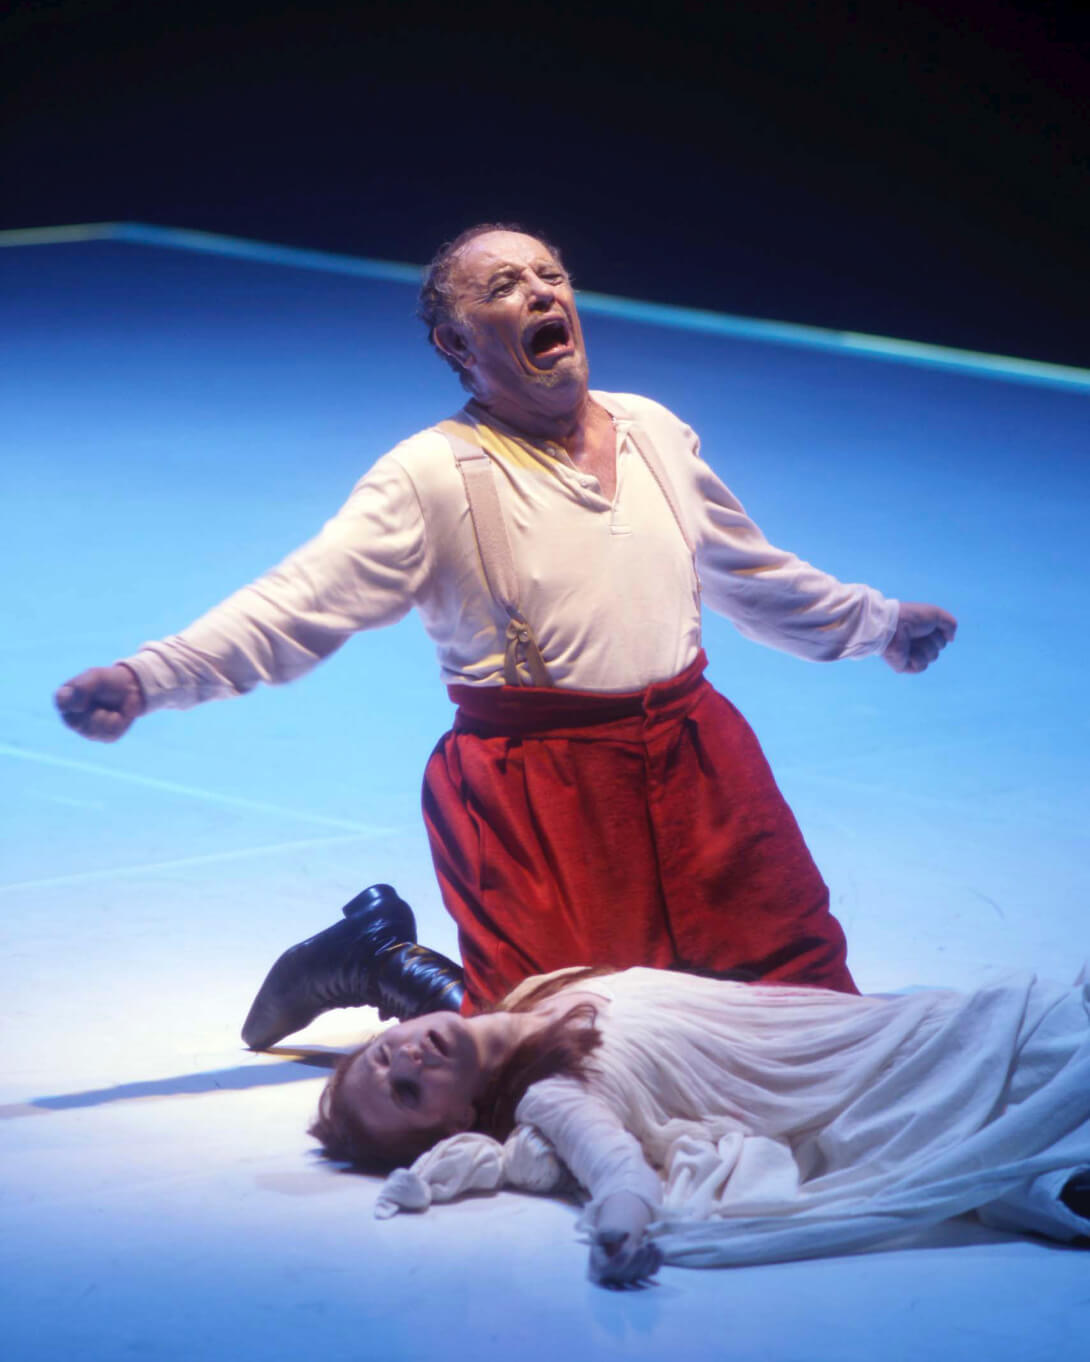 The first encore was in 2009, in Rigoletto. After a direct and spontaneous ovation for the baritone Leo Nucci, he performed encores after all the performances he did that season at the Real.